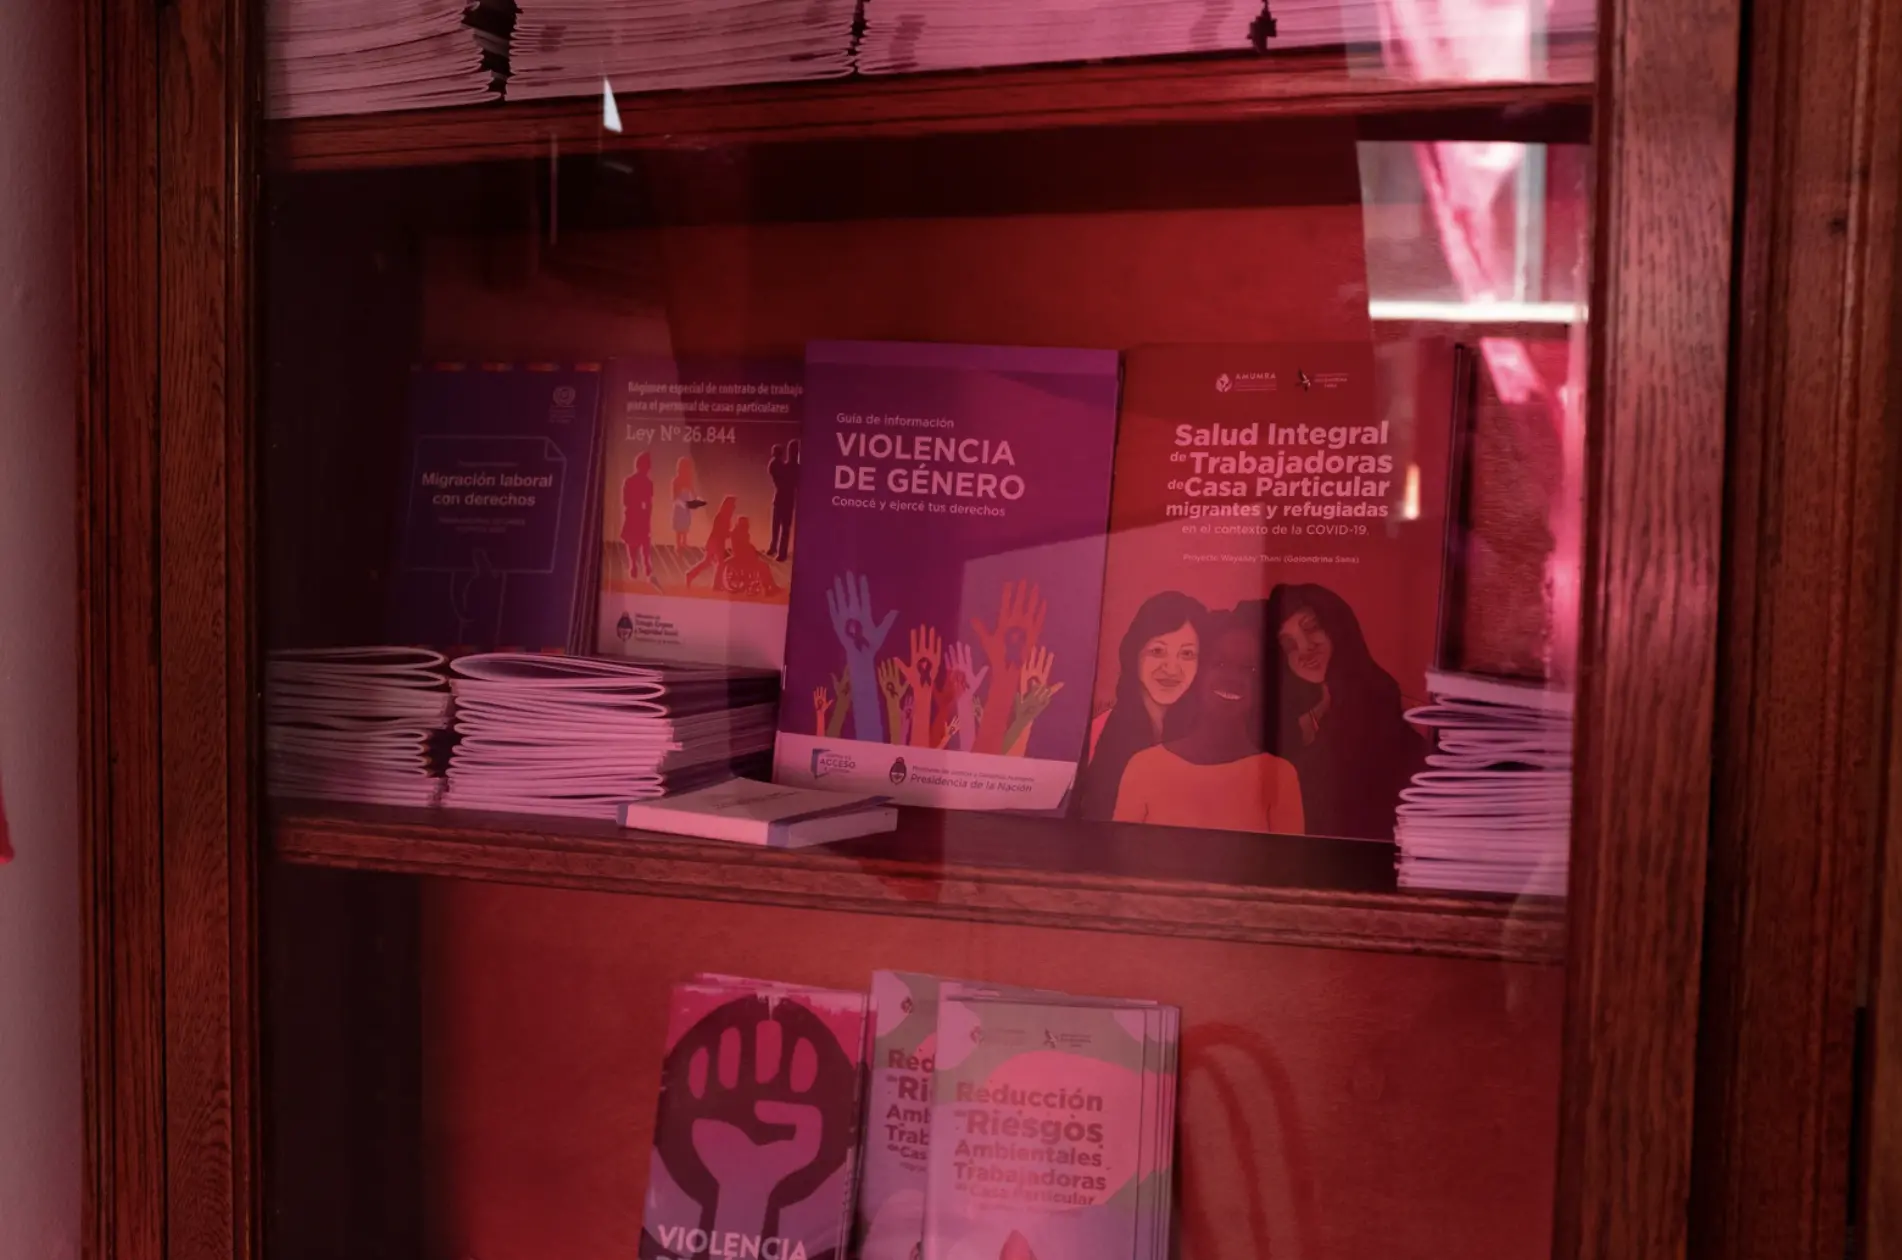 Visible fliers on women's rights in Argentina 